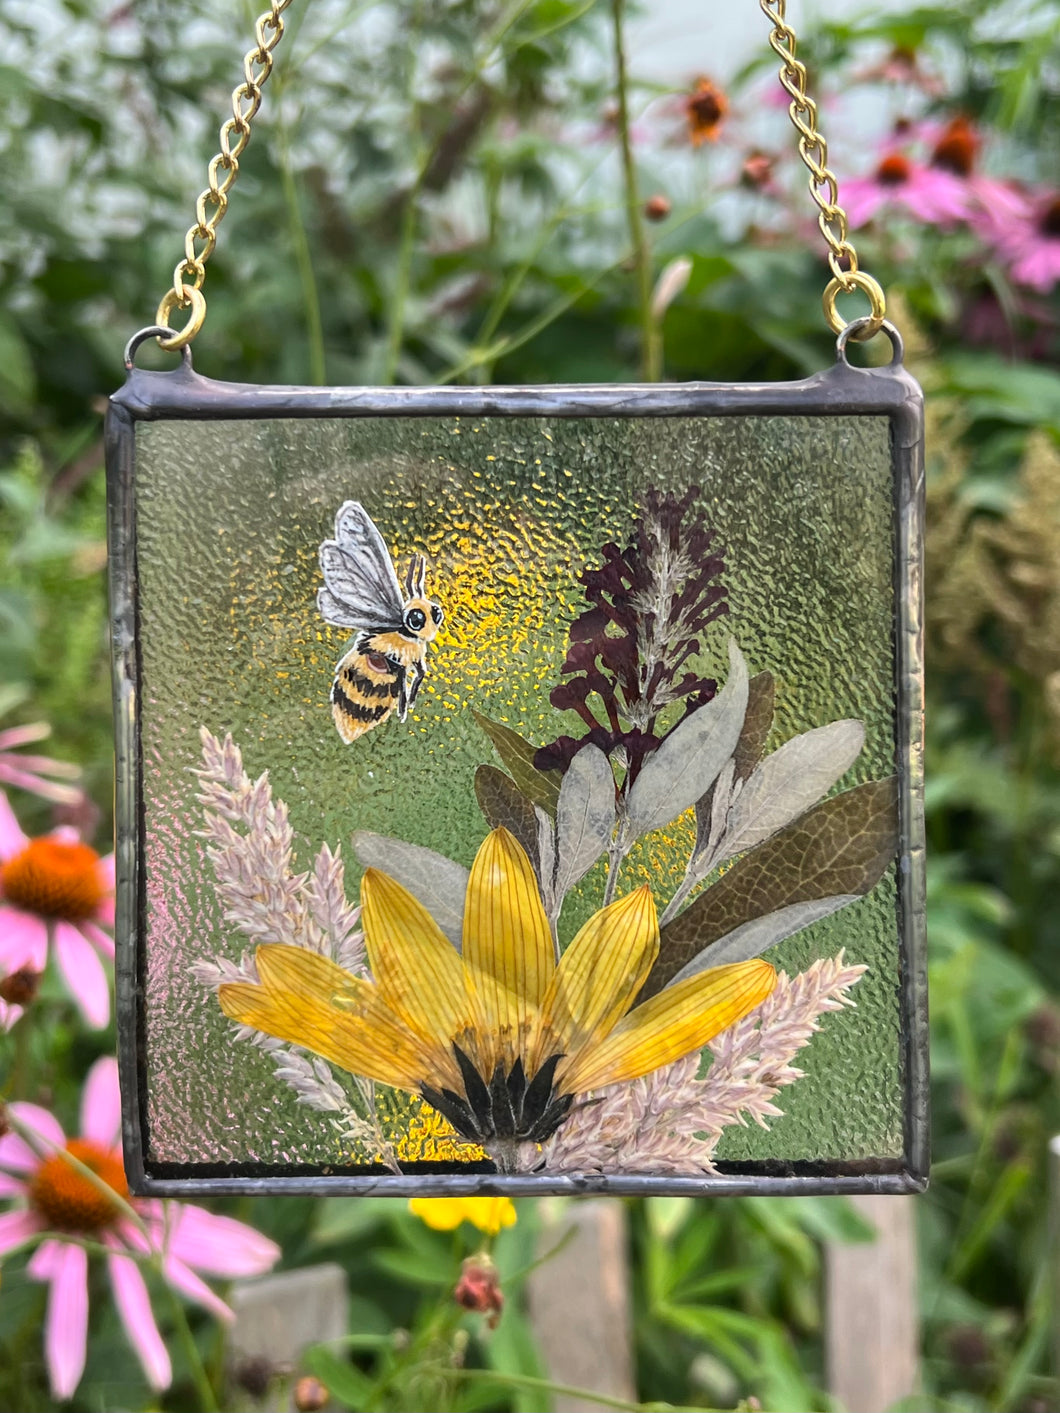 Honeybee painted in gouache on paper with wildflower grasses and  yellow sunflower and butterfly bush with clear textured glass backing. Square shape with gold chain hanger.